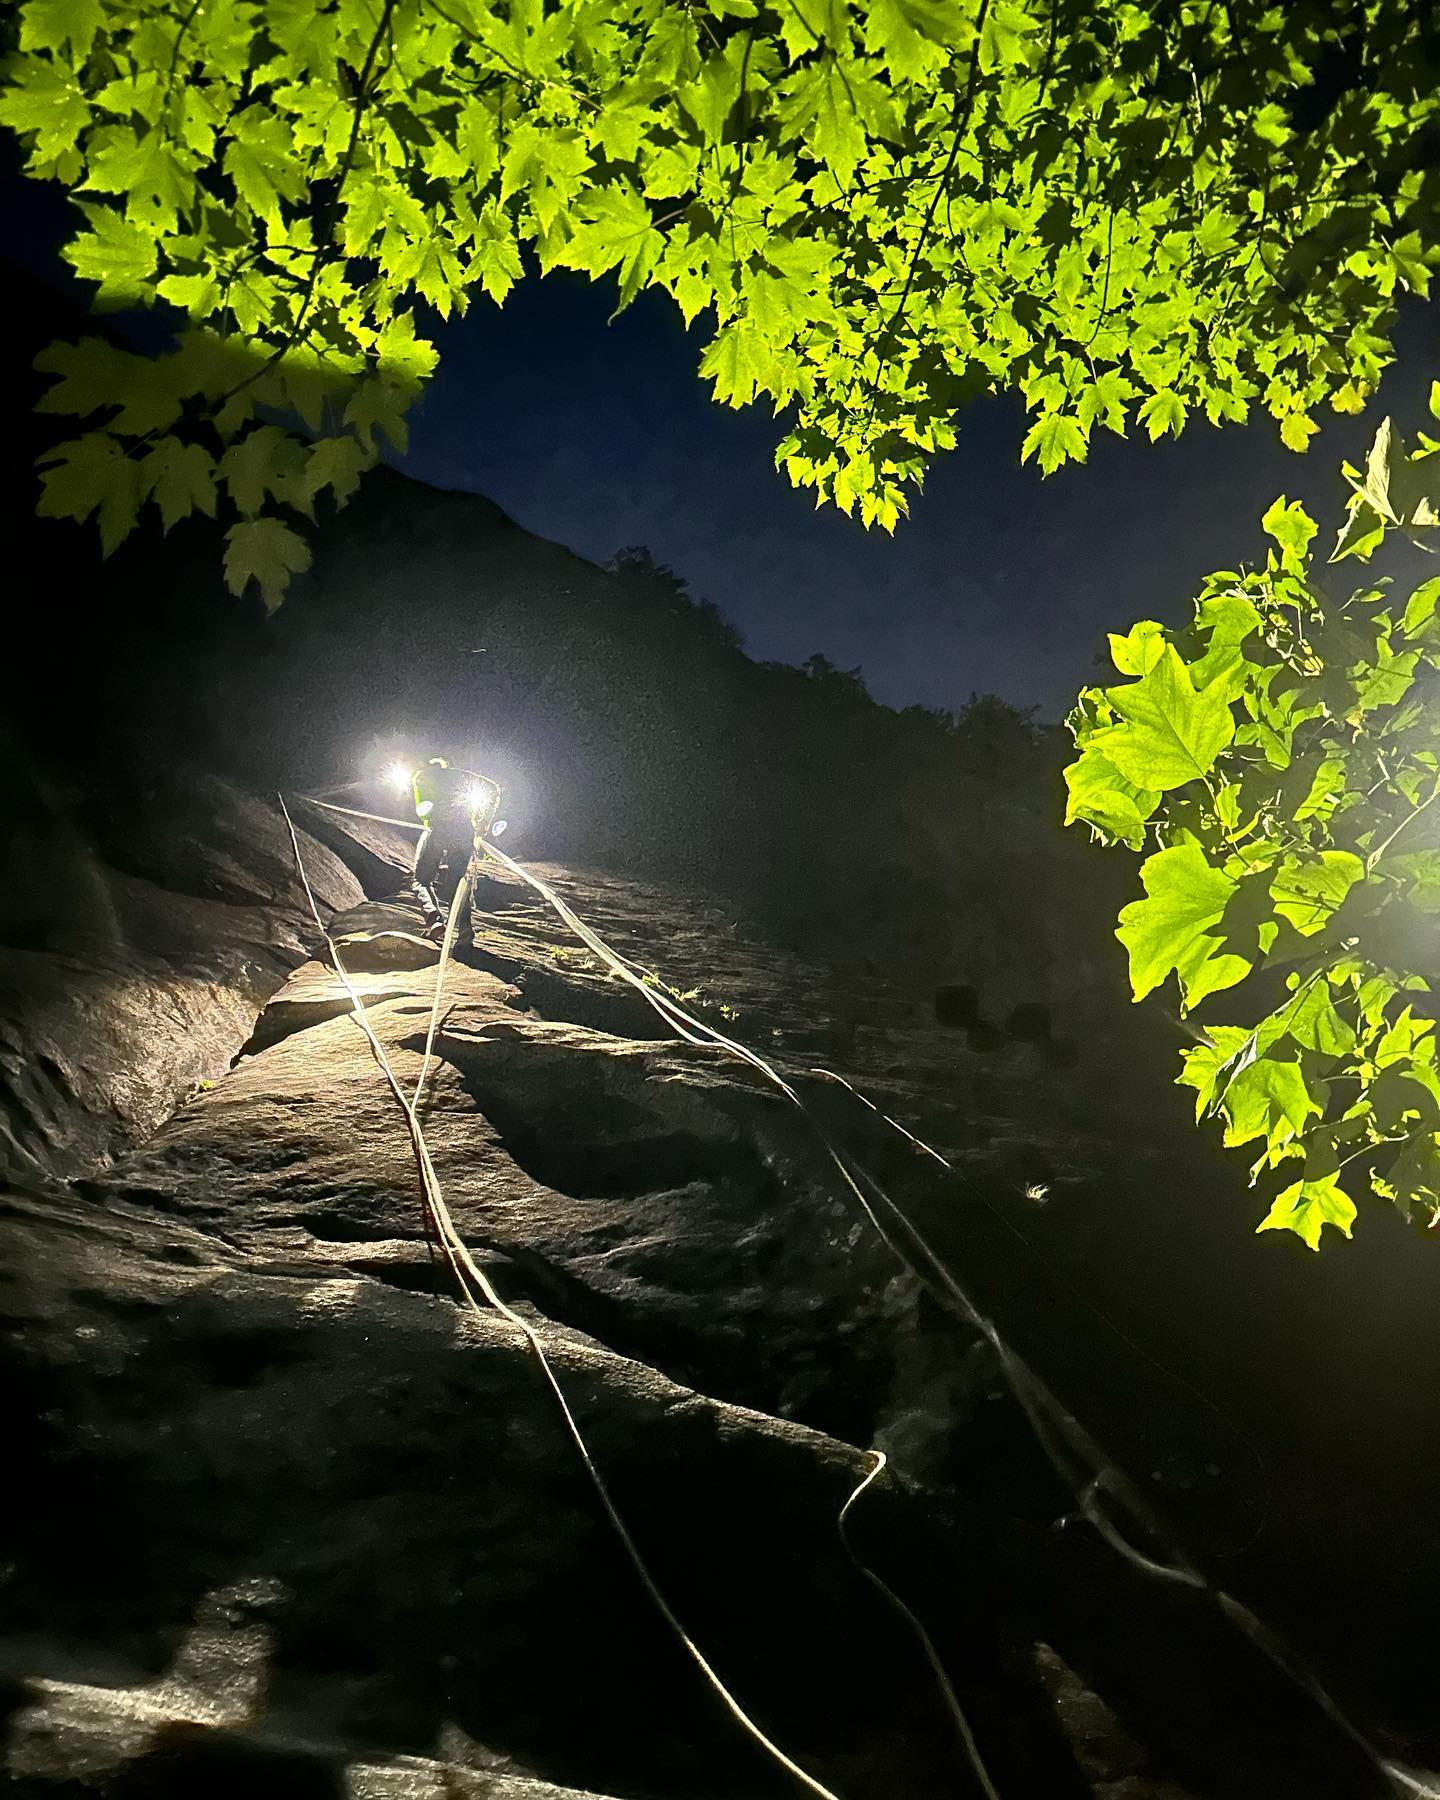 People climbing a rock at night with headlamps on.